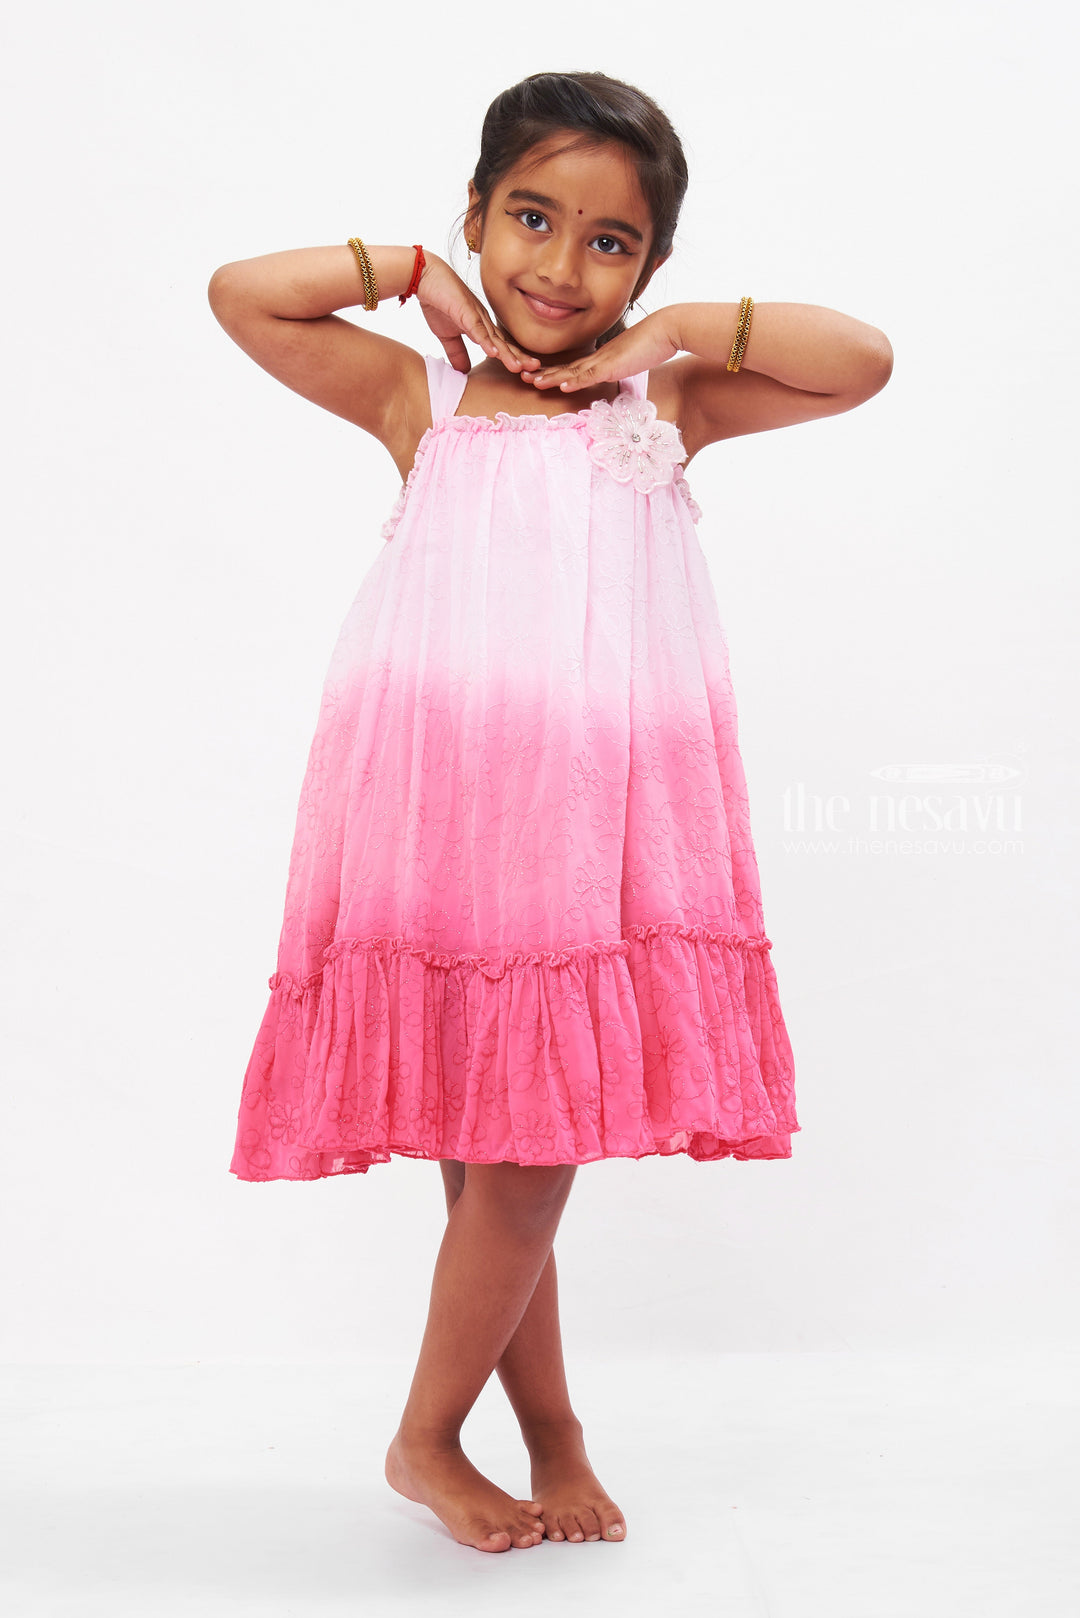 The Nesavu Girls Fancy Frock Girls Pink Princess Frock with Sparkling Tulle - Enchanted Evening Wear Nesavu 16 (1Y) / Pink GFC1225A-16 Girls Pink Party Frock | Sparkly Tulle Dress for Kids | The Nesavu